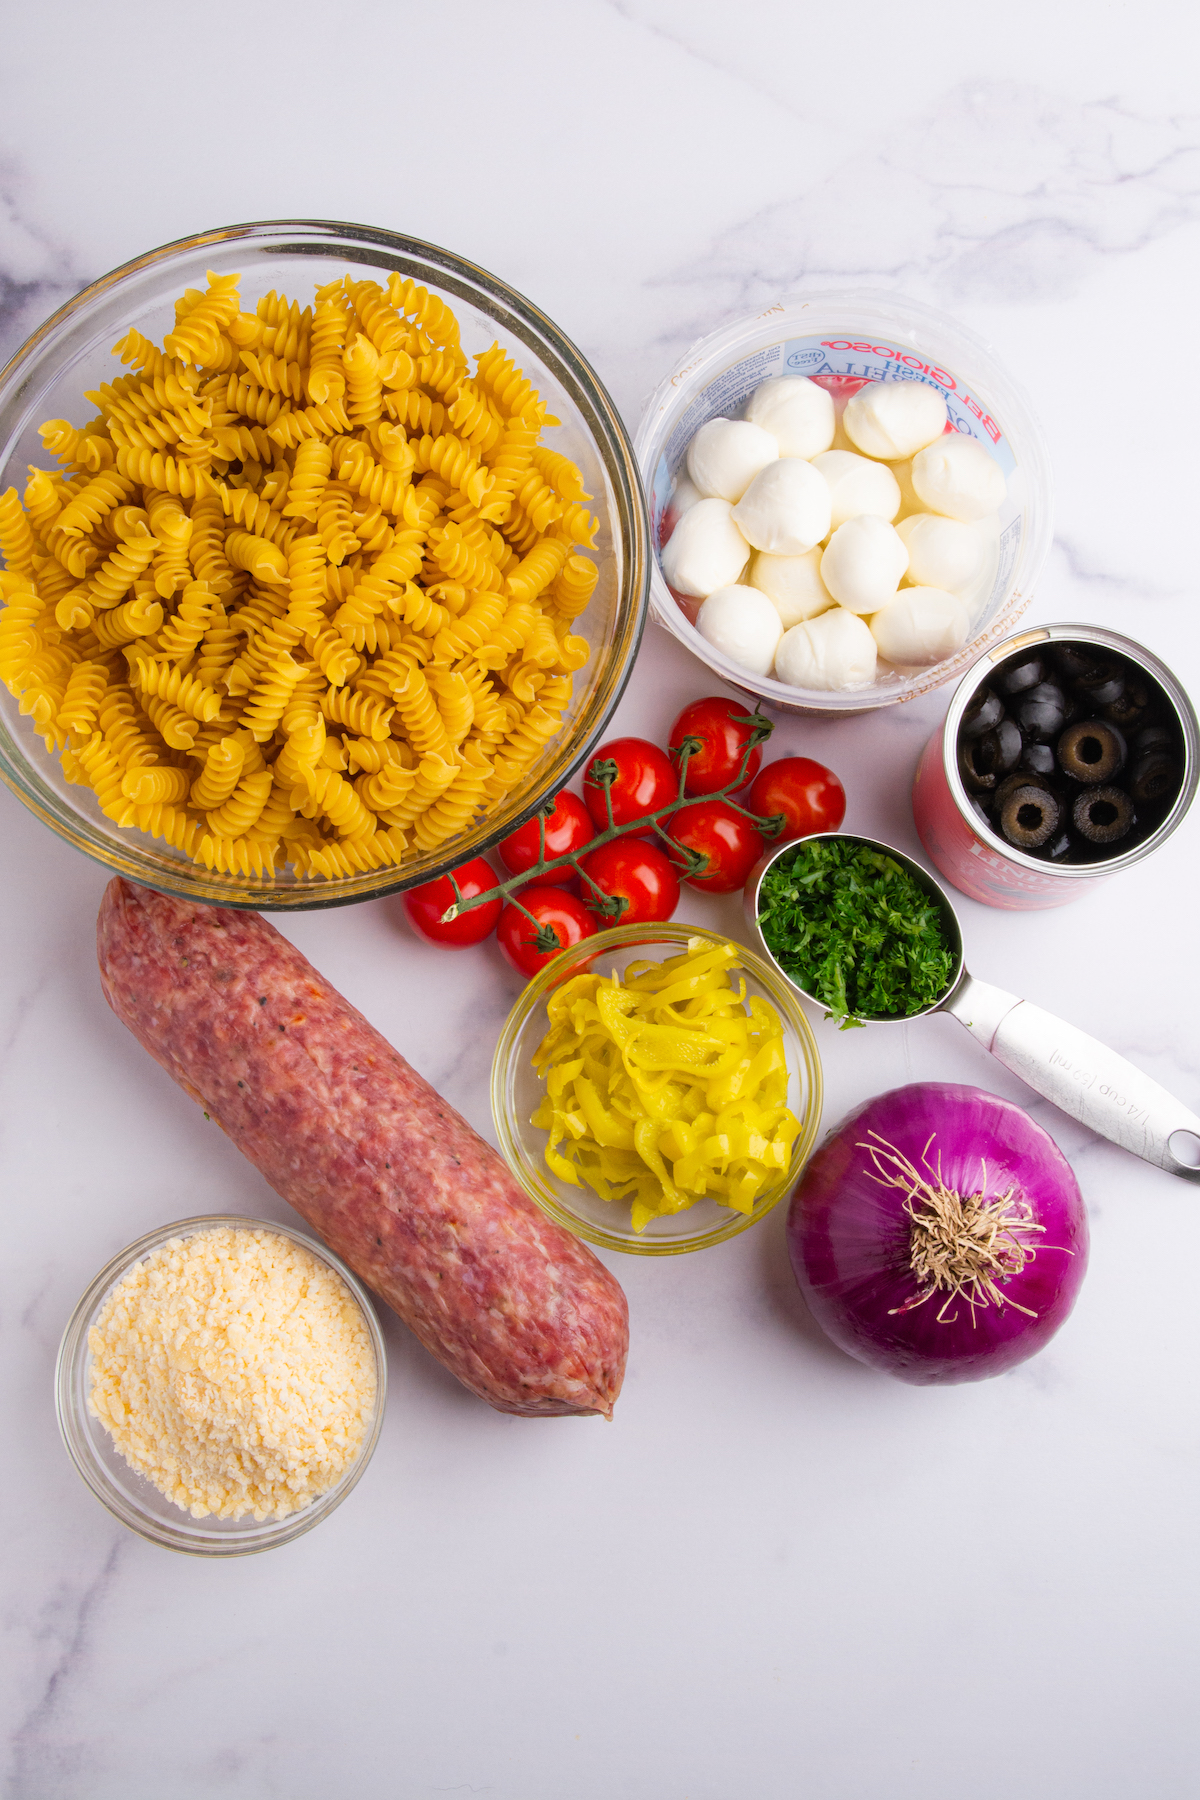 Ingredients for an Italian Pasta Salad. Uncooked rotini pasta, mozzarella balls, cherry tomatoes, a can of sliced black olives, pepperoncini slices, a red onion, salami sausage, grated Parmesan cheese.